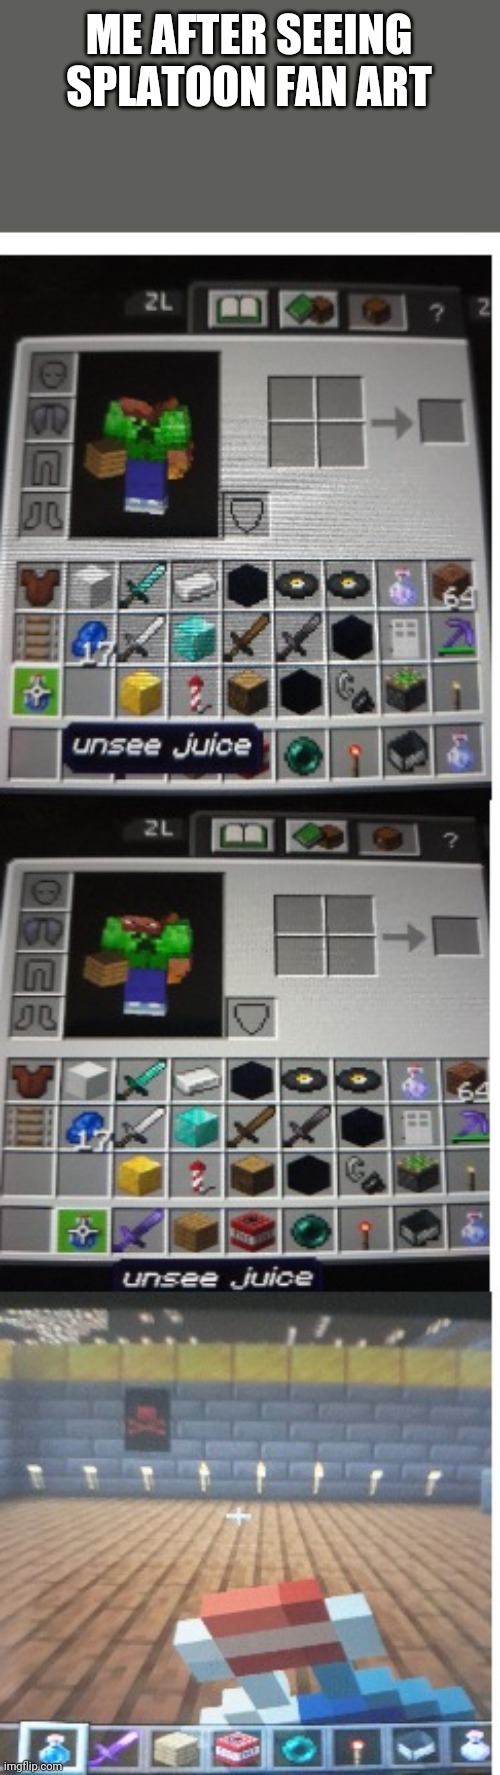 Unsee juice minecraft |  ME AFTER SEEING SPLATOON FAN ART | image tagged in unsee juice minecraft,memes,funny | made w/ Imgflip meme maker